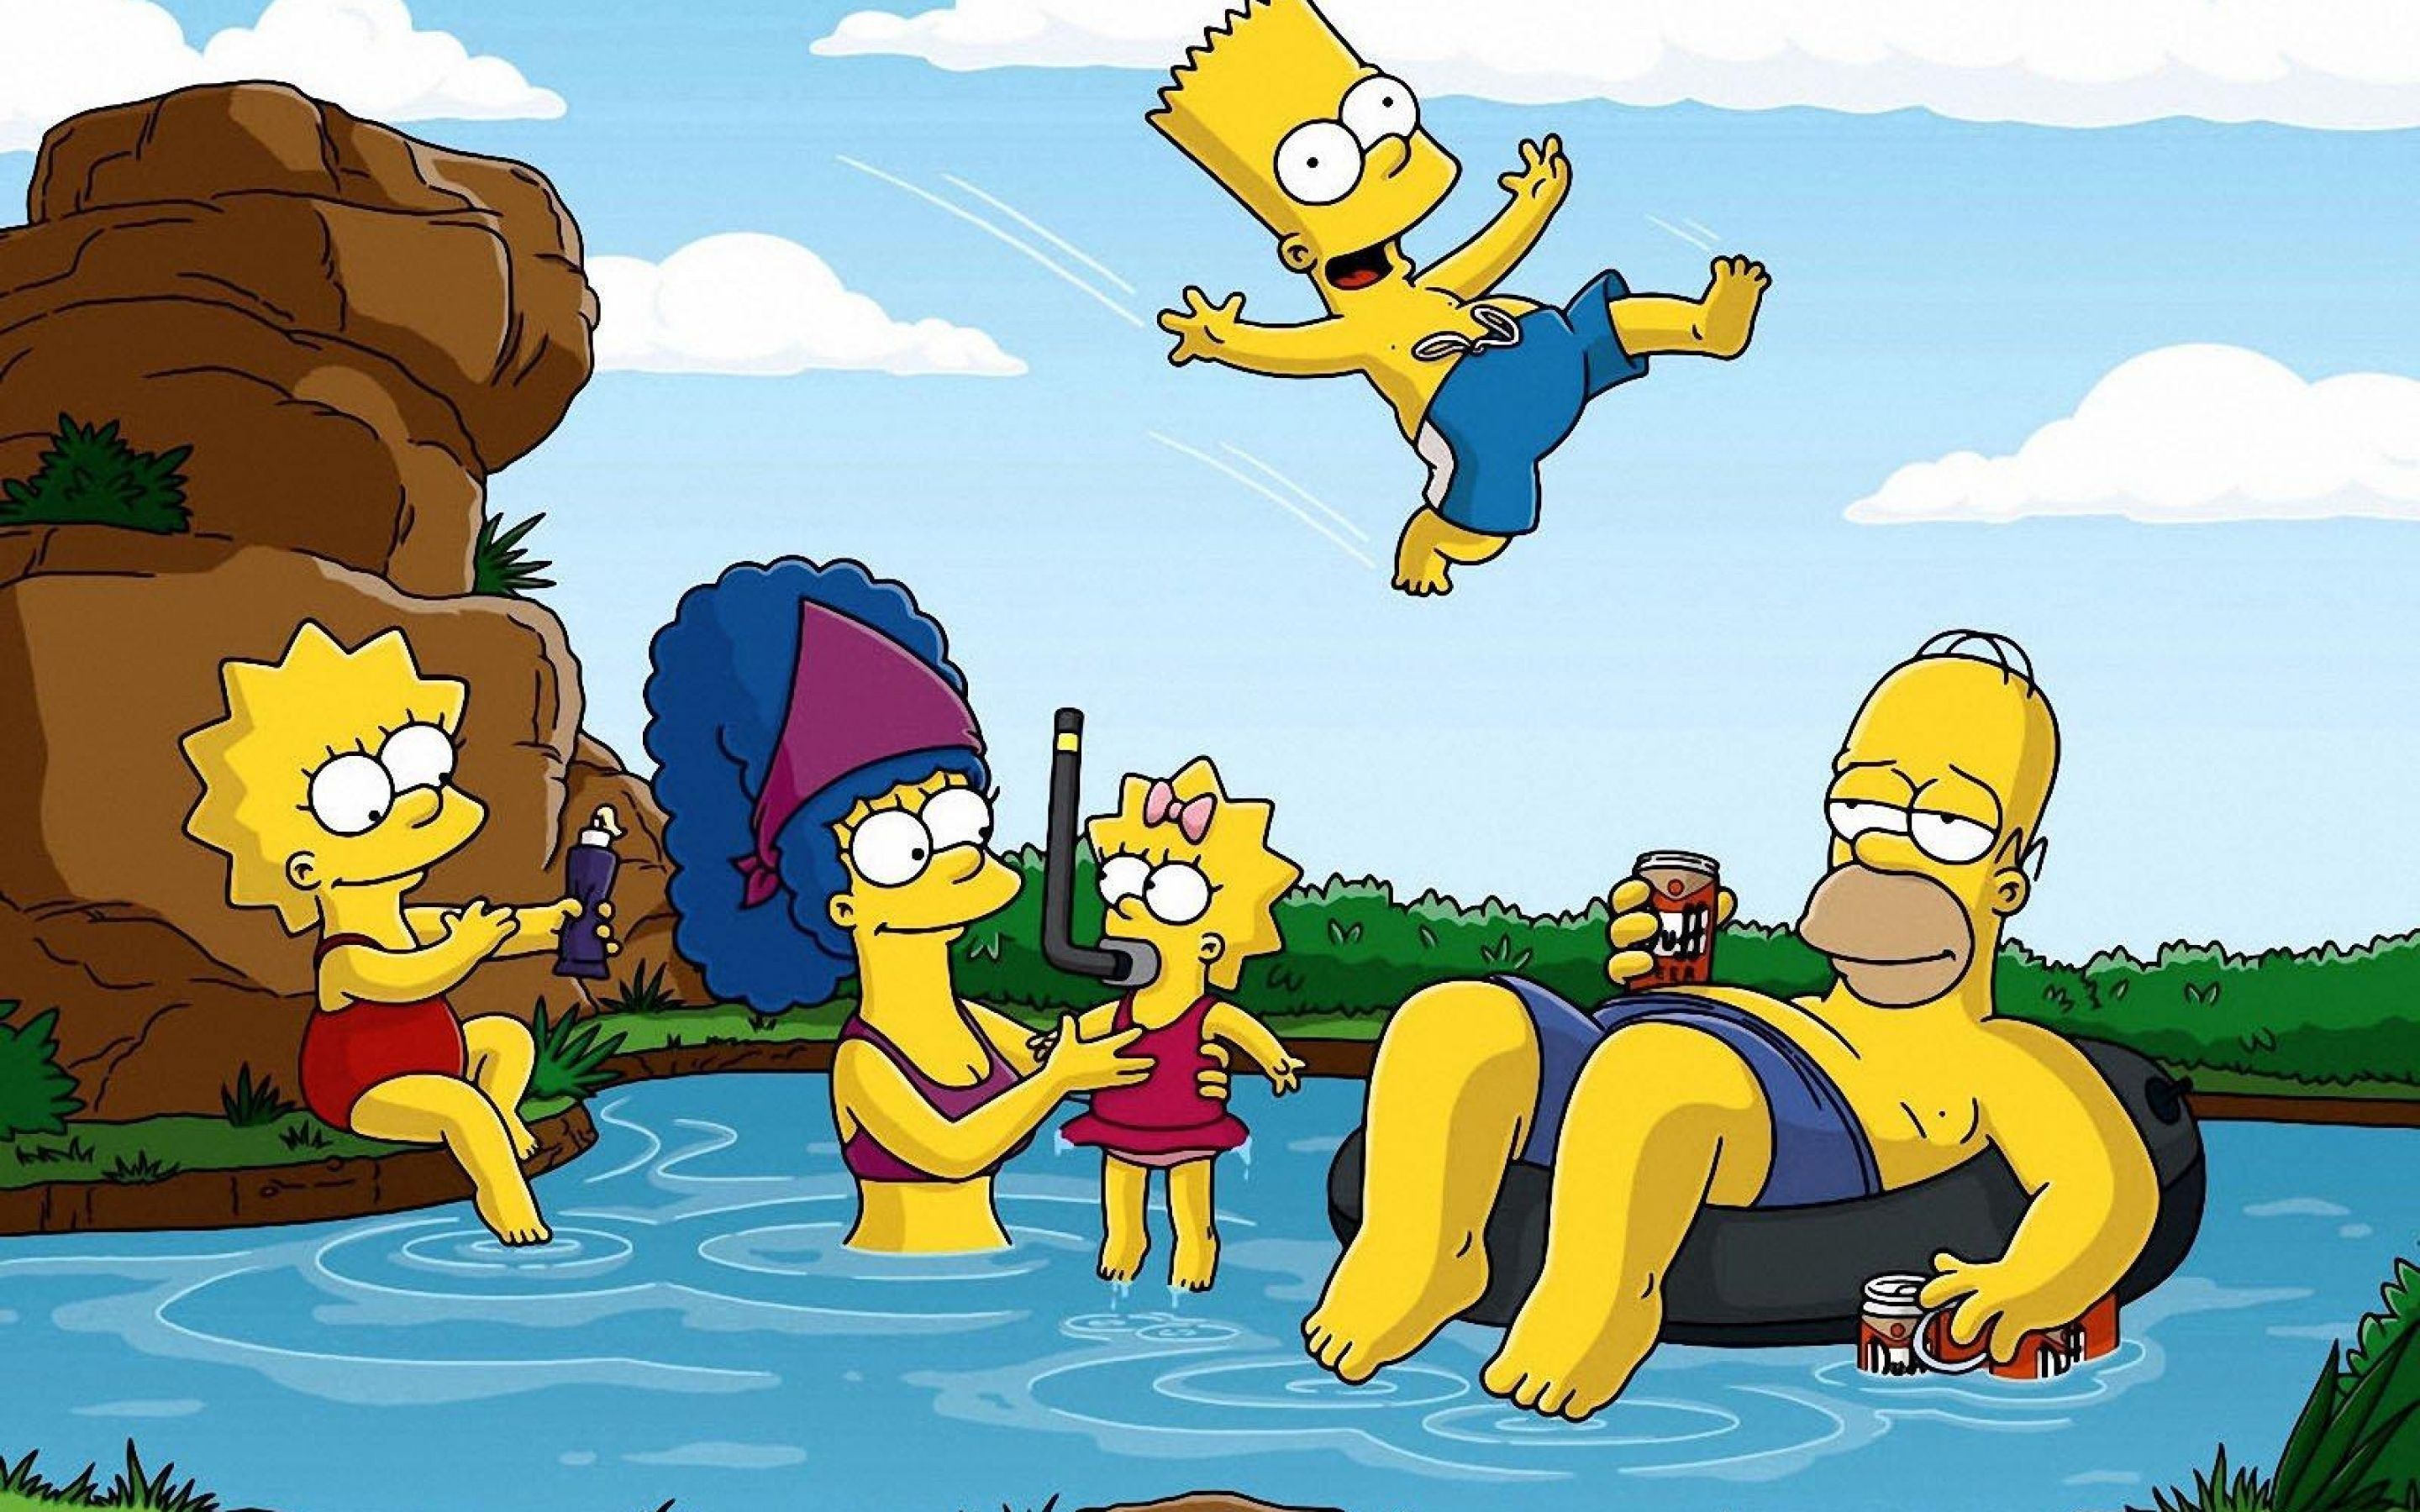 Please check our widescreen Simpsons HD Wallpapers below and bring beauty to your desktop.